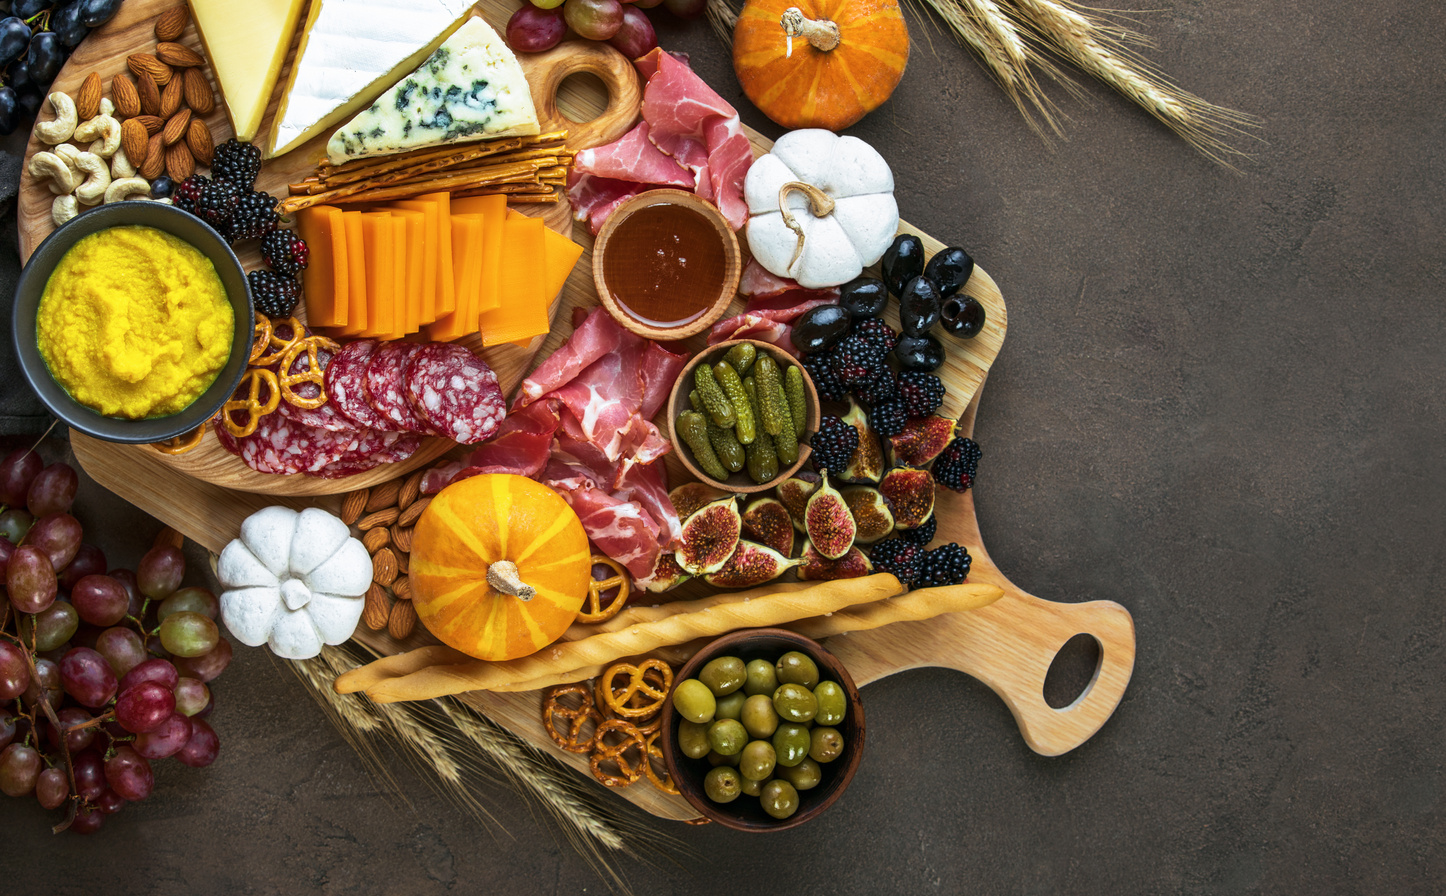 Fall party charcuterie board, view from above